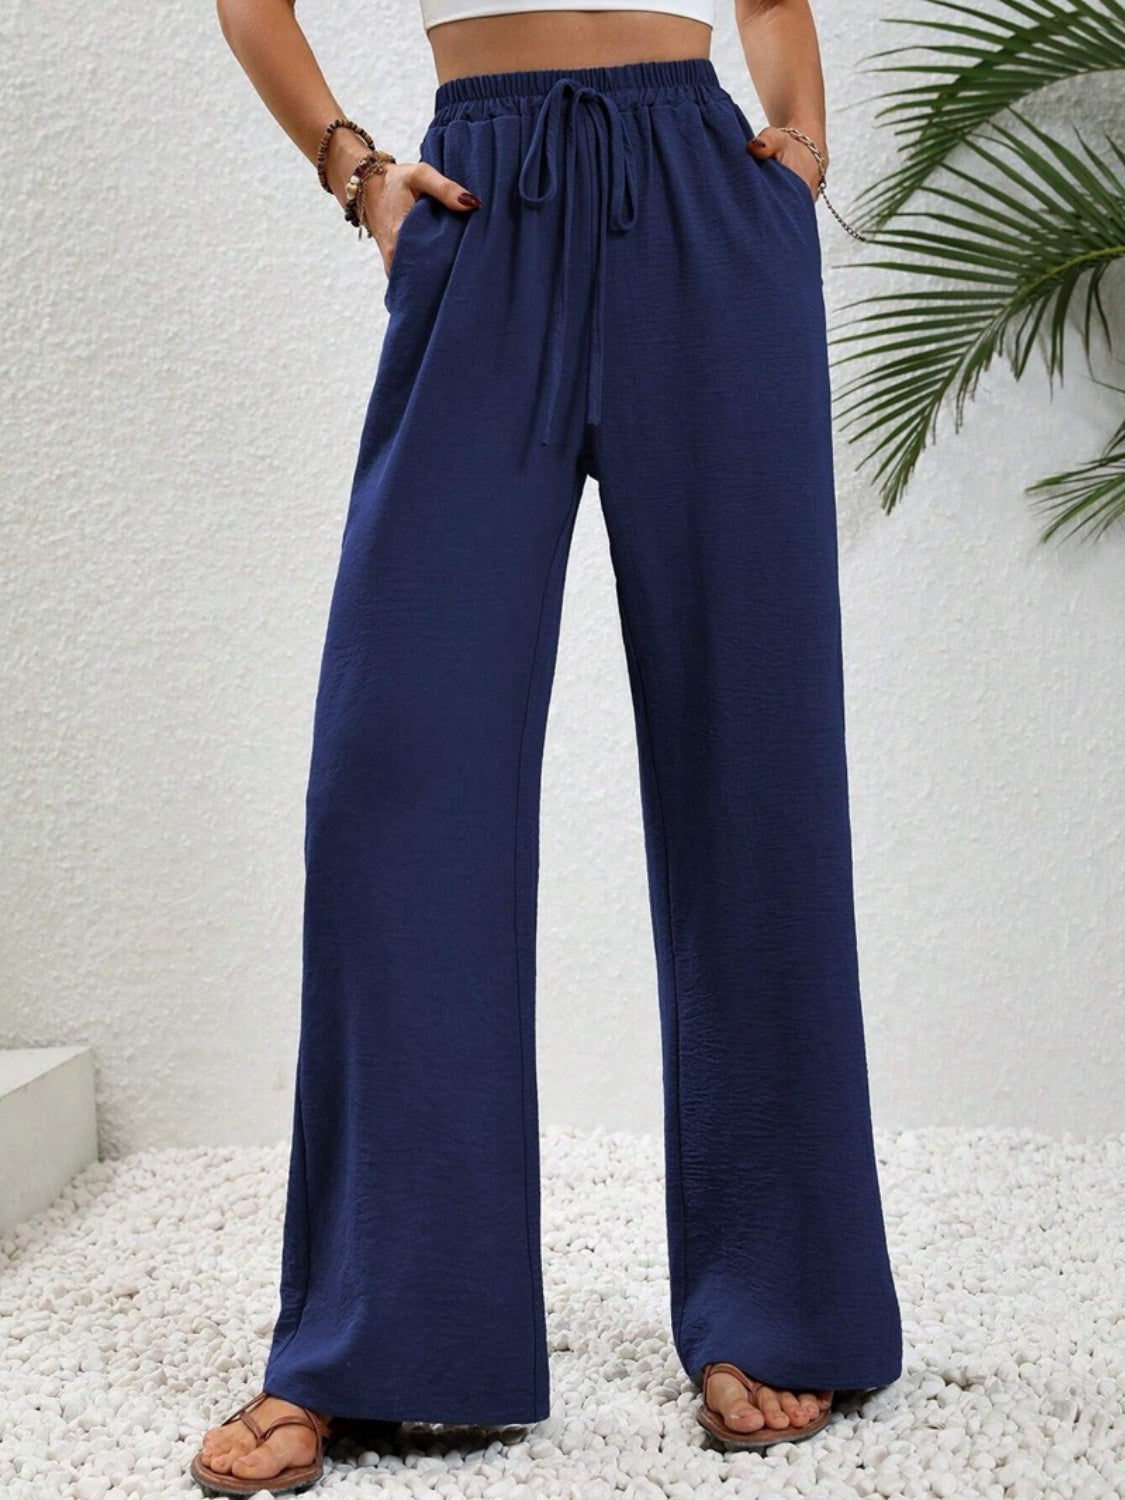 Discover chic comfort with our Wide Leg Drawstring Pants—perfect for any occasion, available in 9 colors. Elevate your wardrobe today!